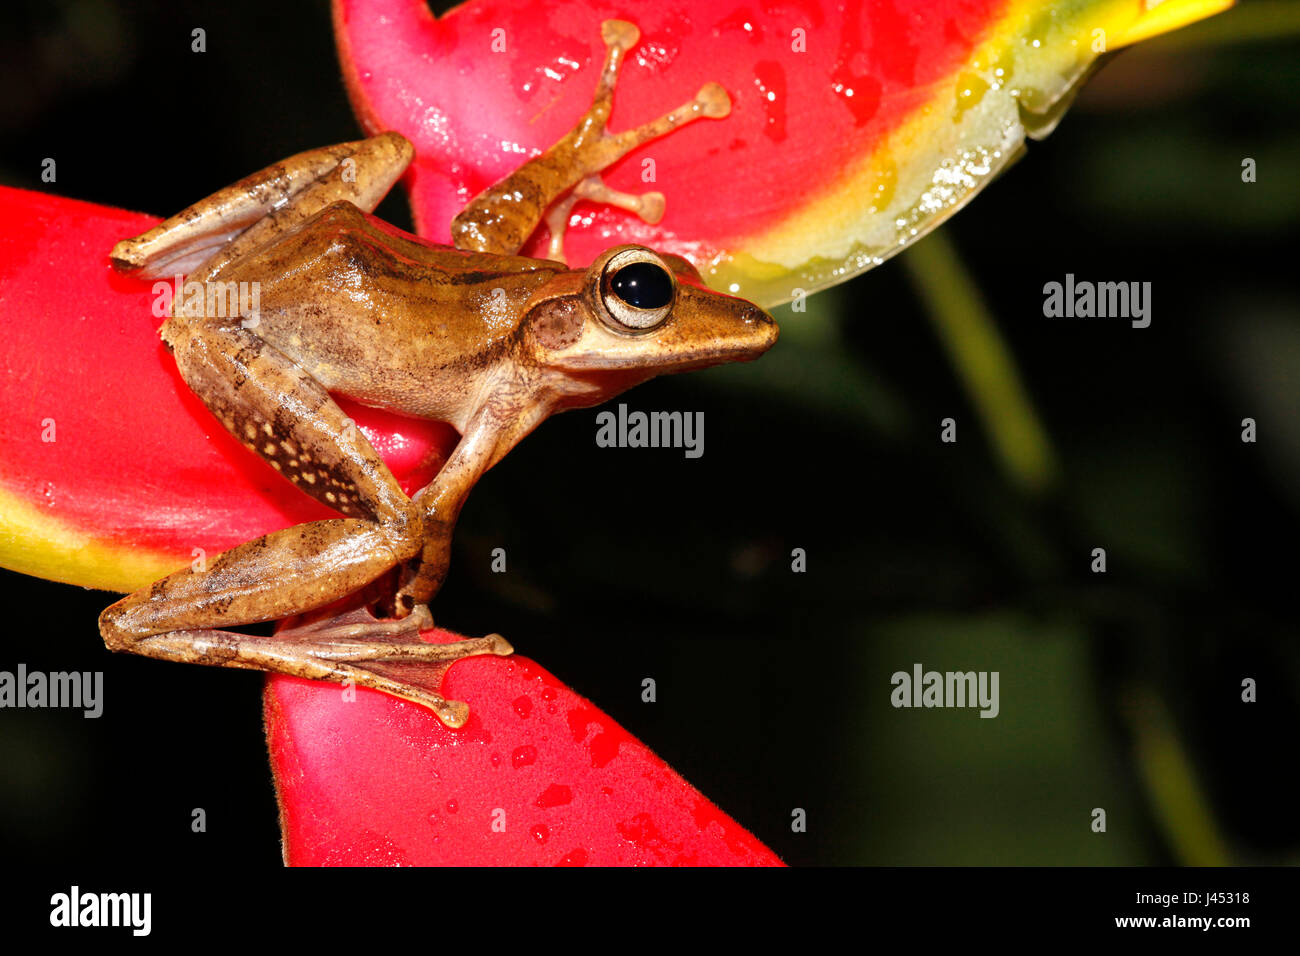 photo of a fourlined tree-frog on a Crab Claw Flower Stock Photo